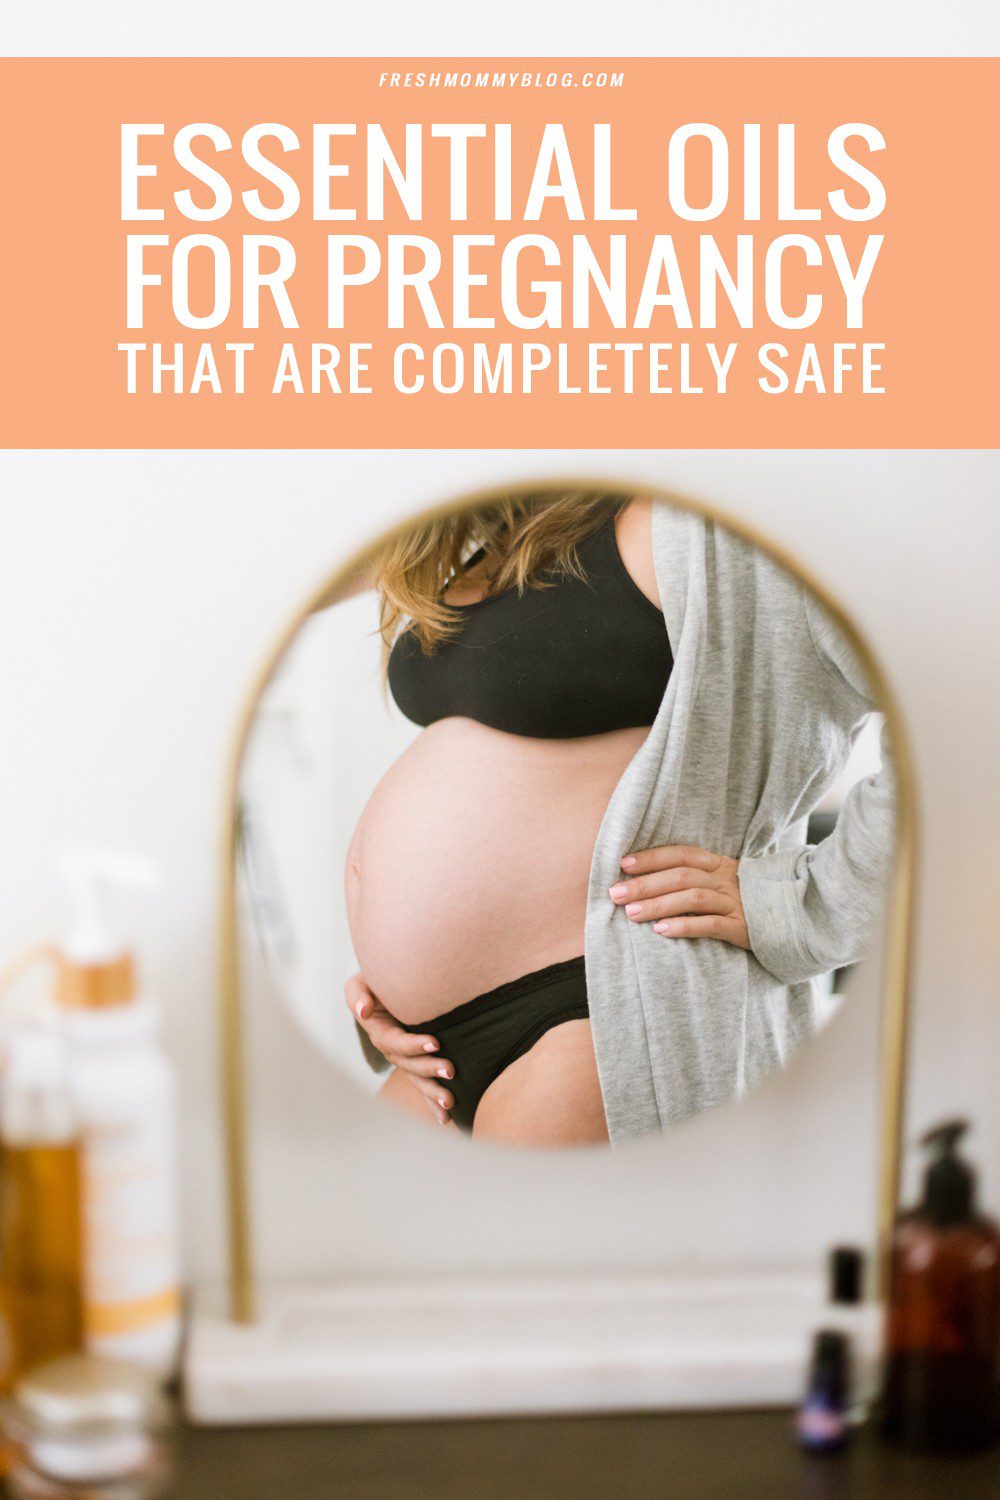 Essential Oils While Pregnant That are Completely Safe | Top 10 Essential Oils While Pregnant That are Completely Safe by popular Florida lifestyle blog, Fresh Mommy: image of woman wearing a grey robe, black sports bra, black underwear and standing in front of a mirror and holding her pregnant belly with one hand. 